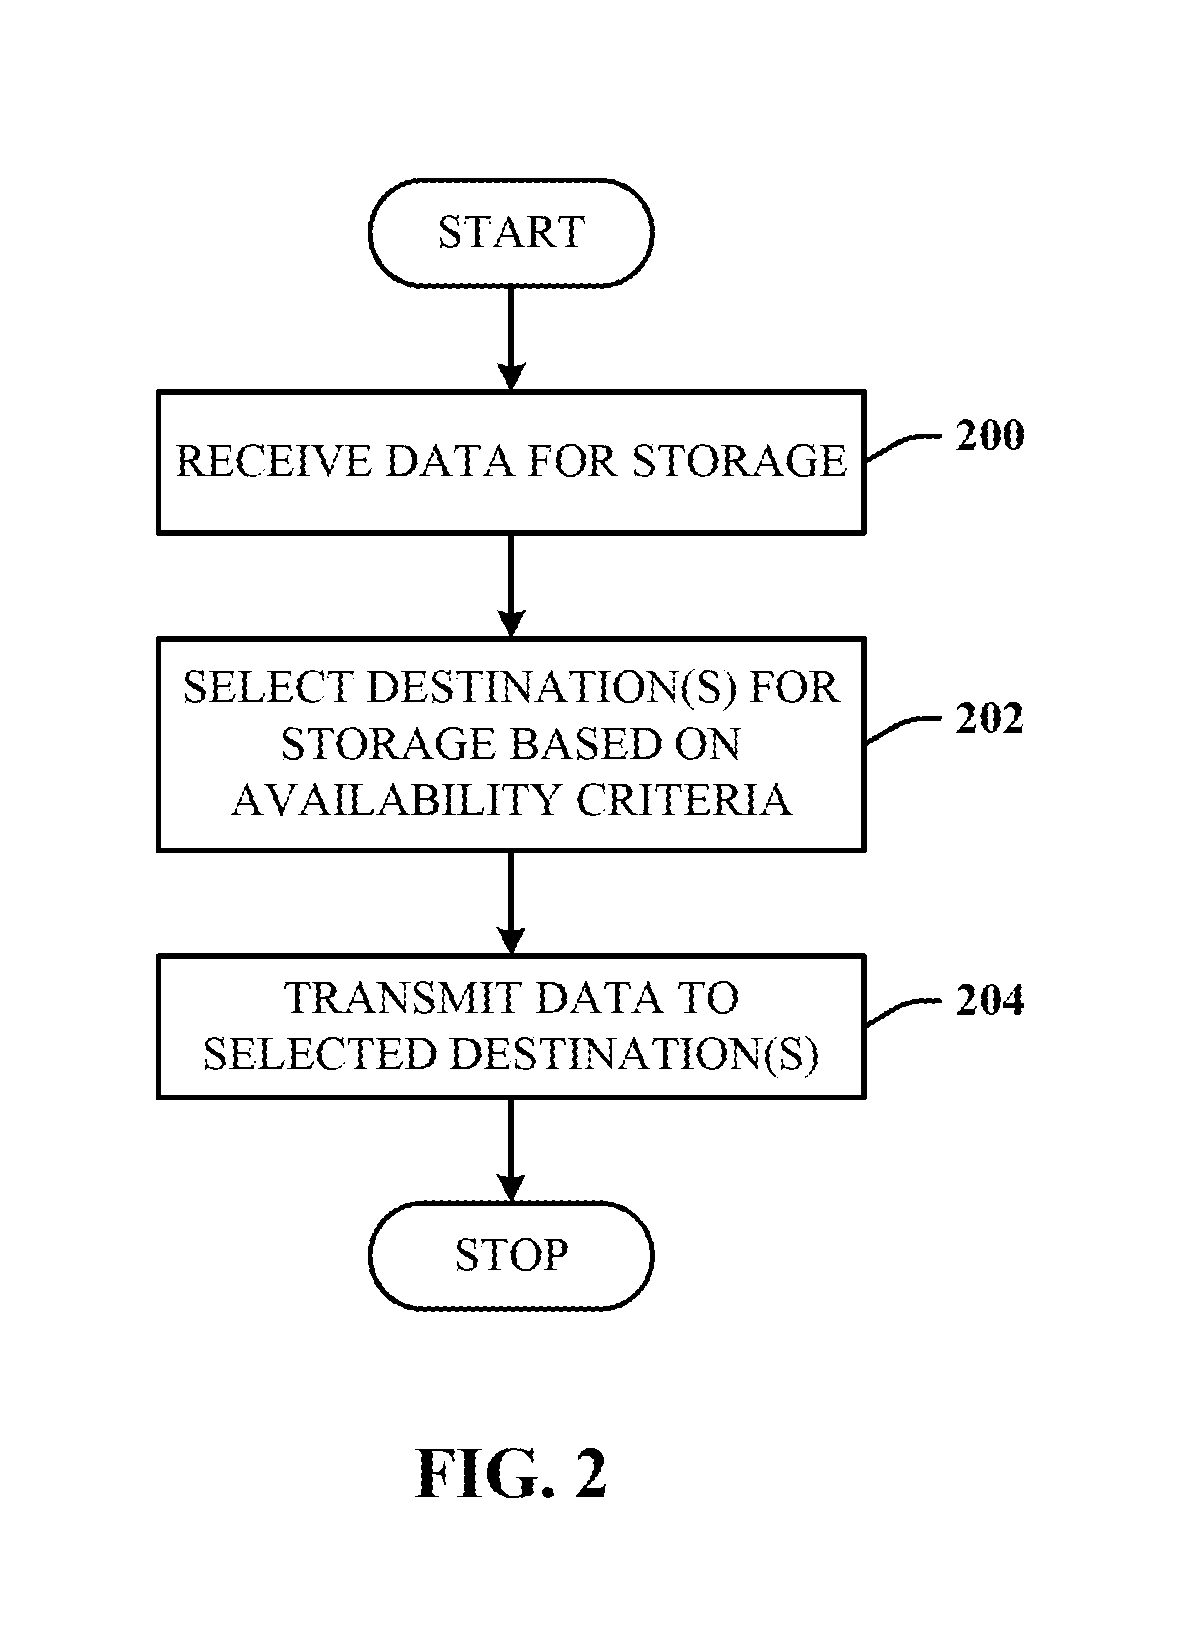 Peer-to-peer exchange of data resources in a control system